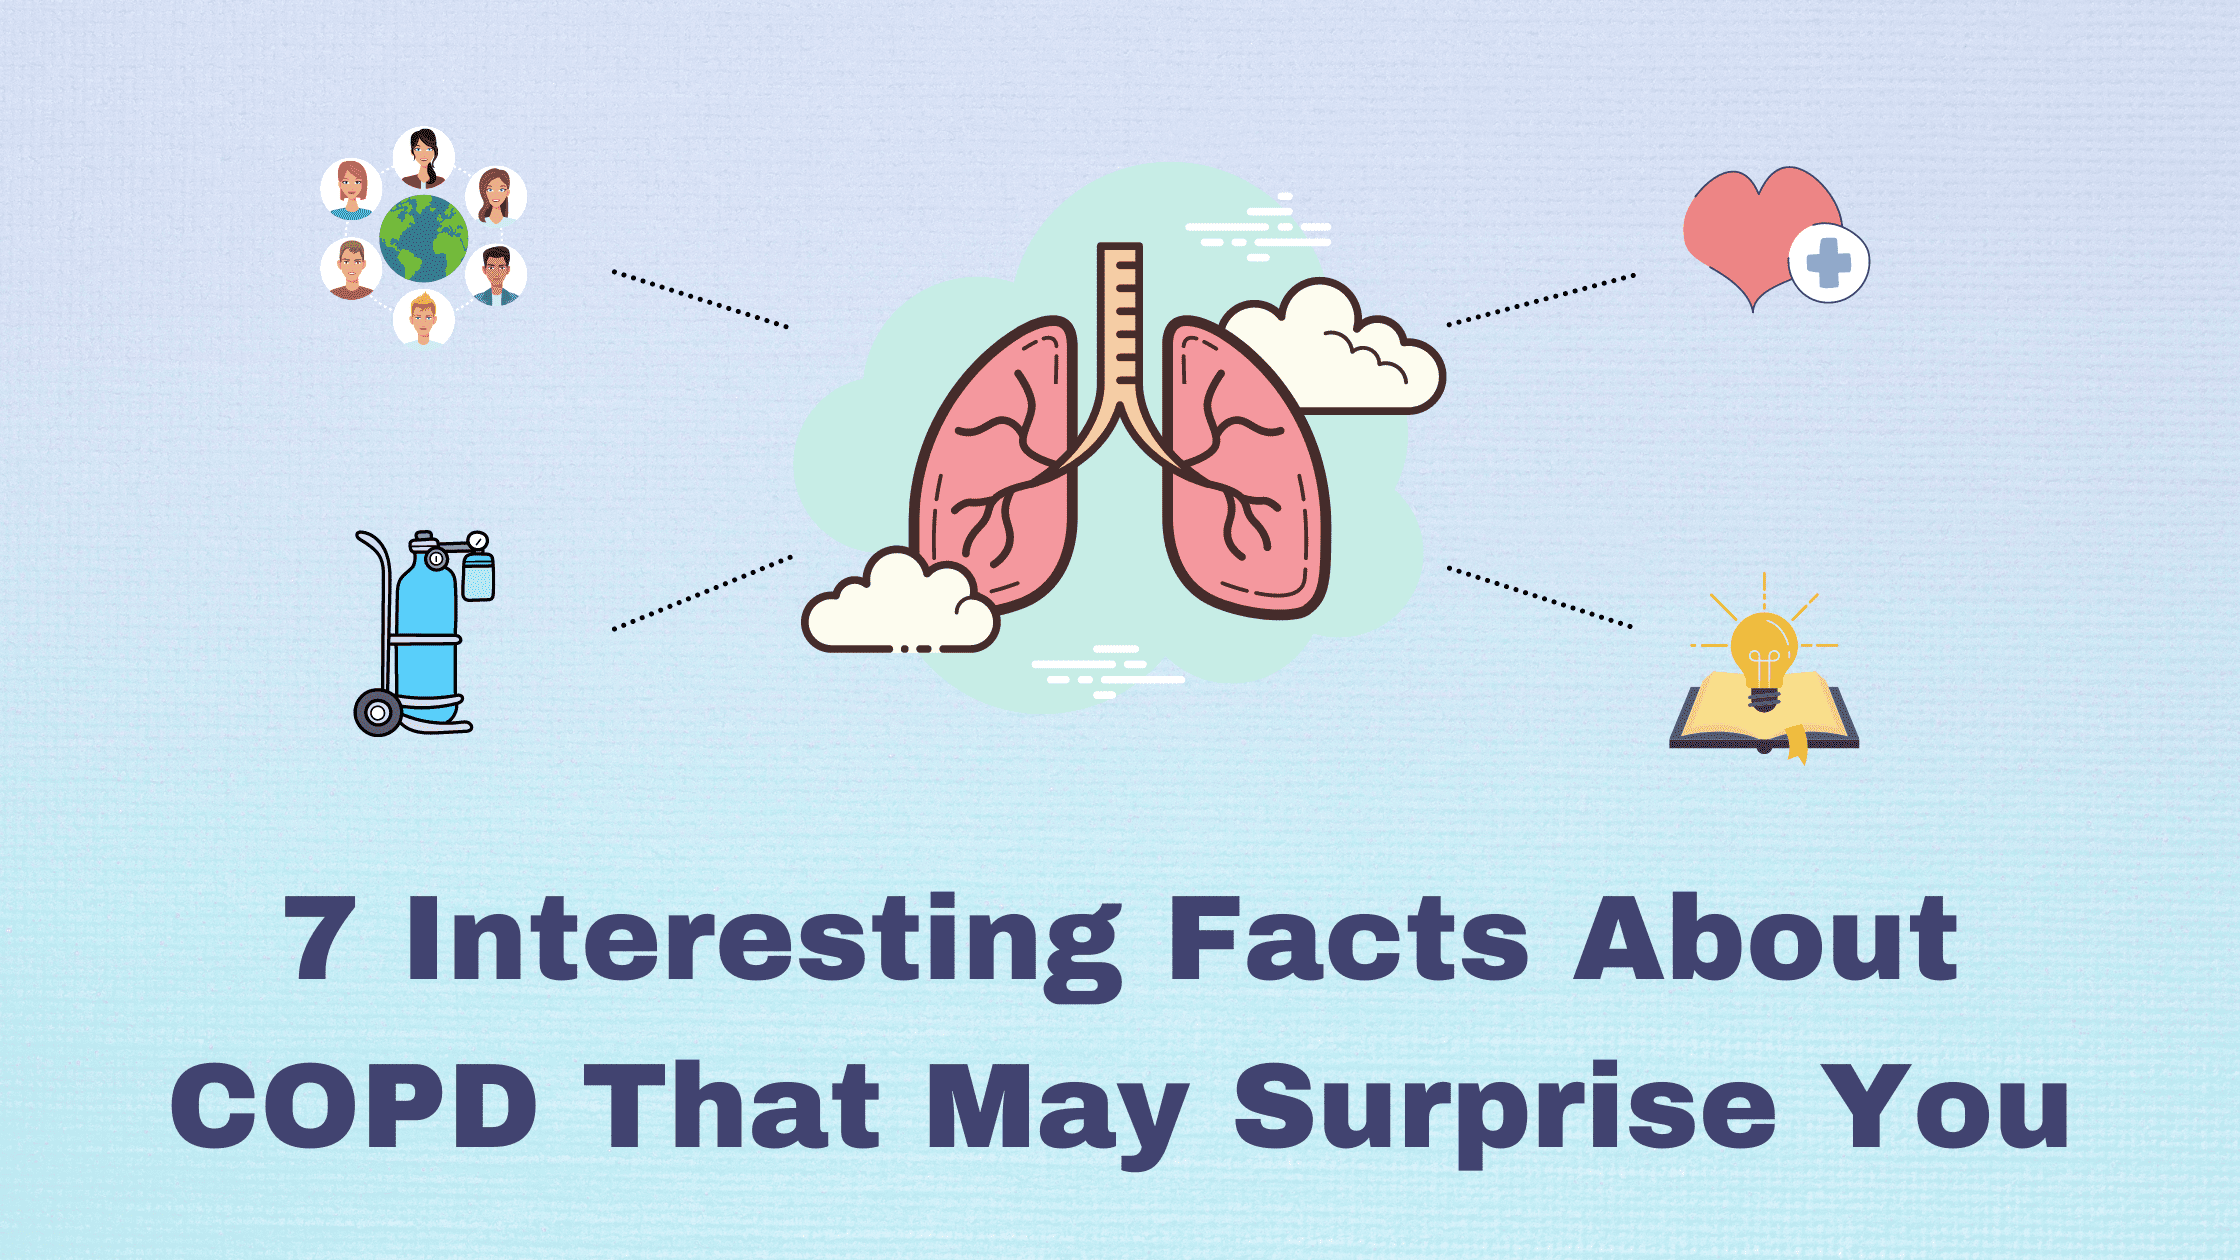 7 Interesting Facts About COPD That May Surprise You